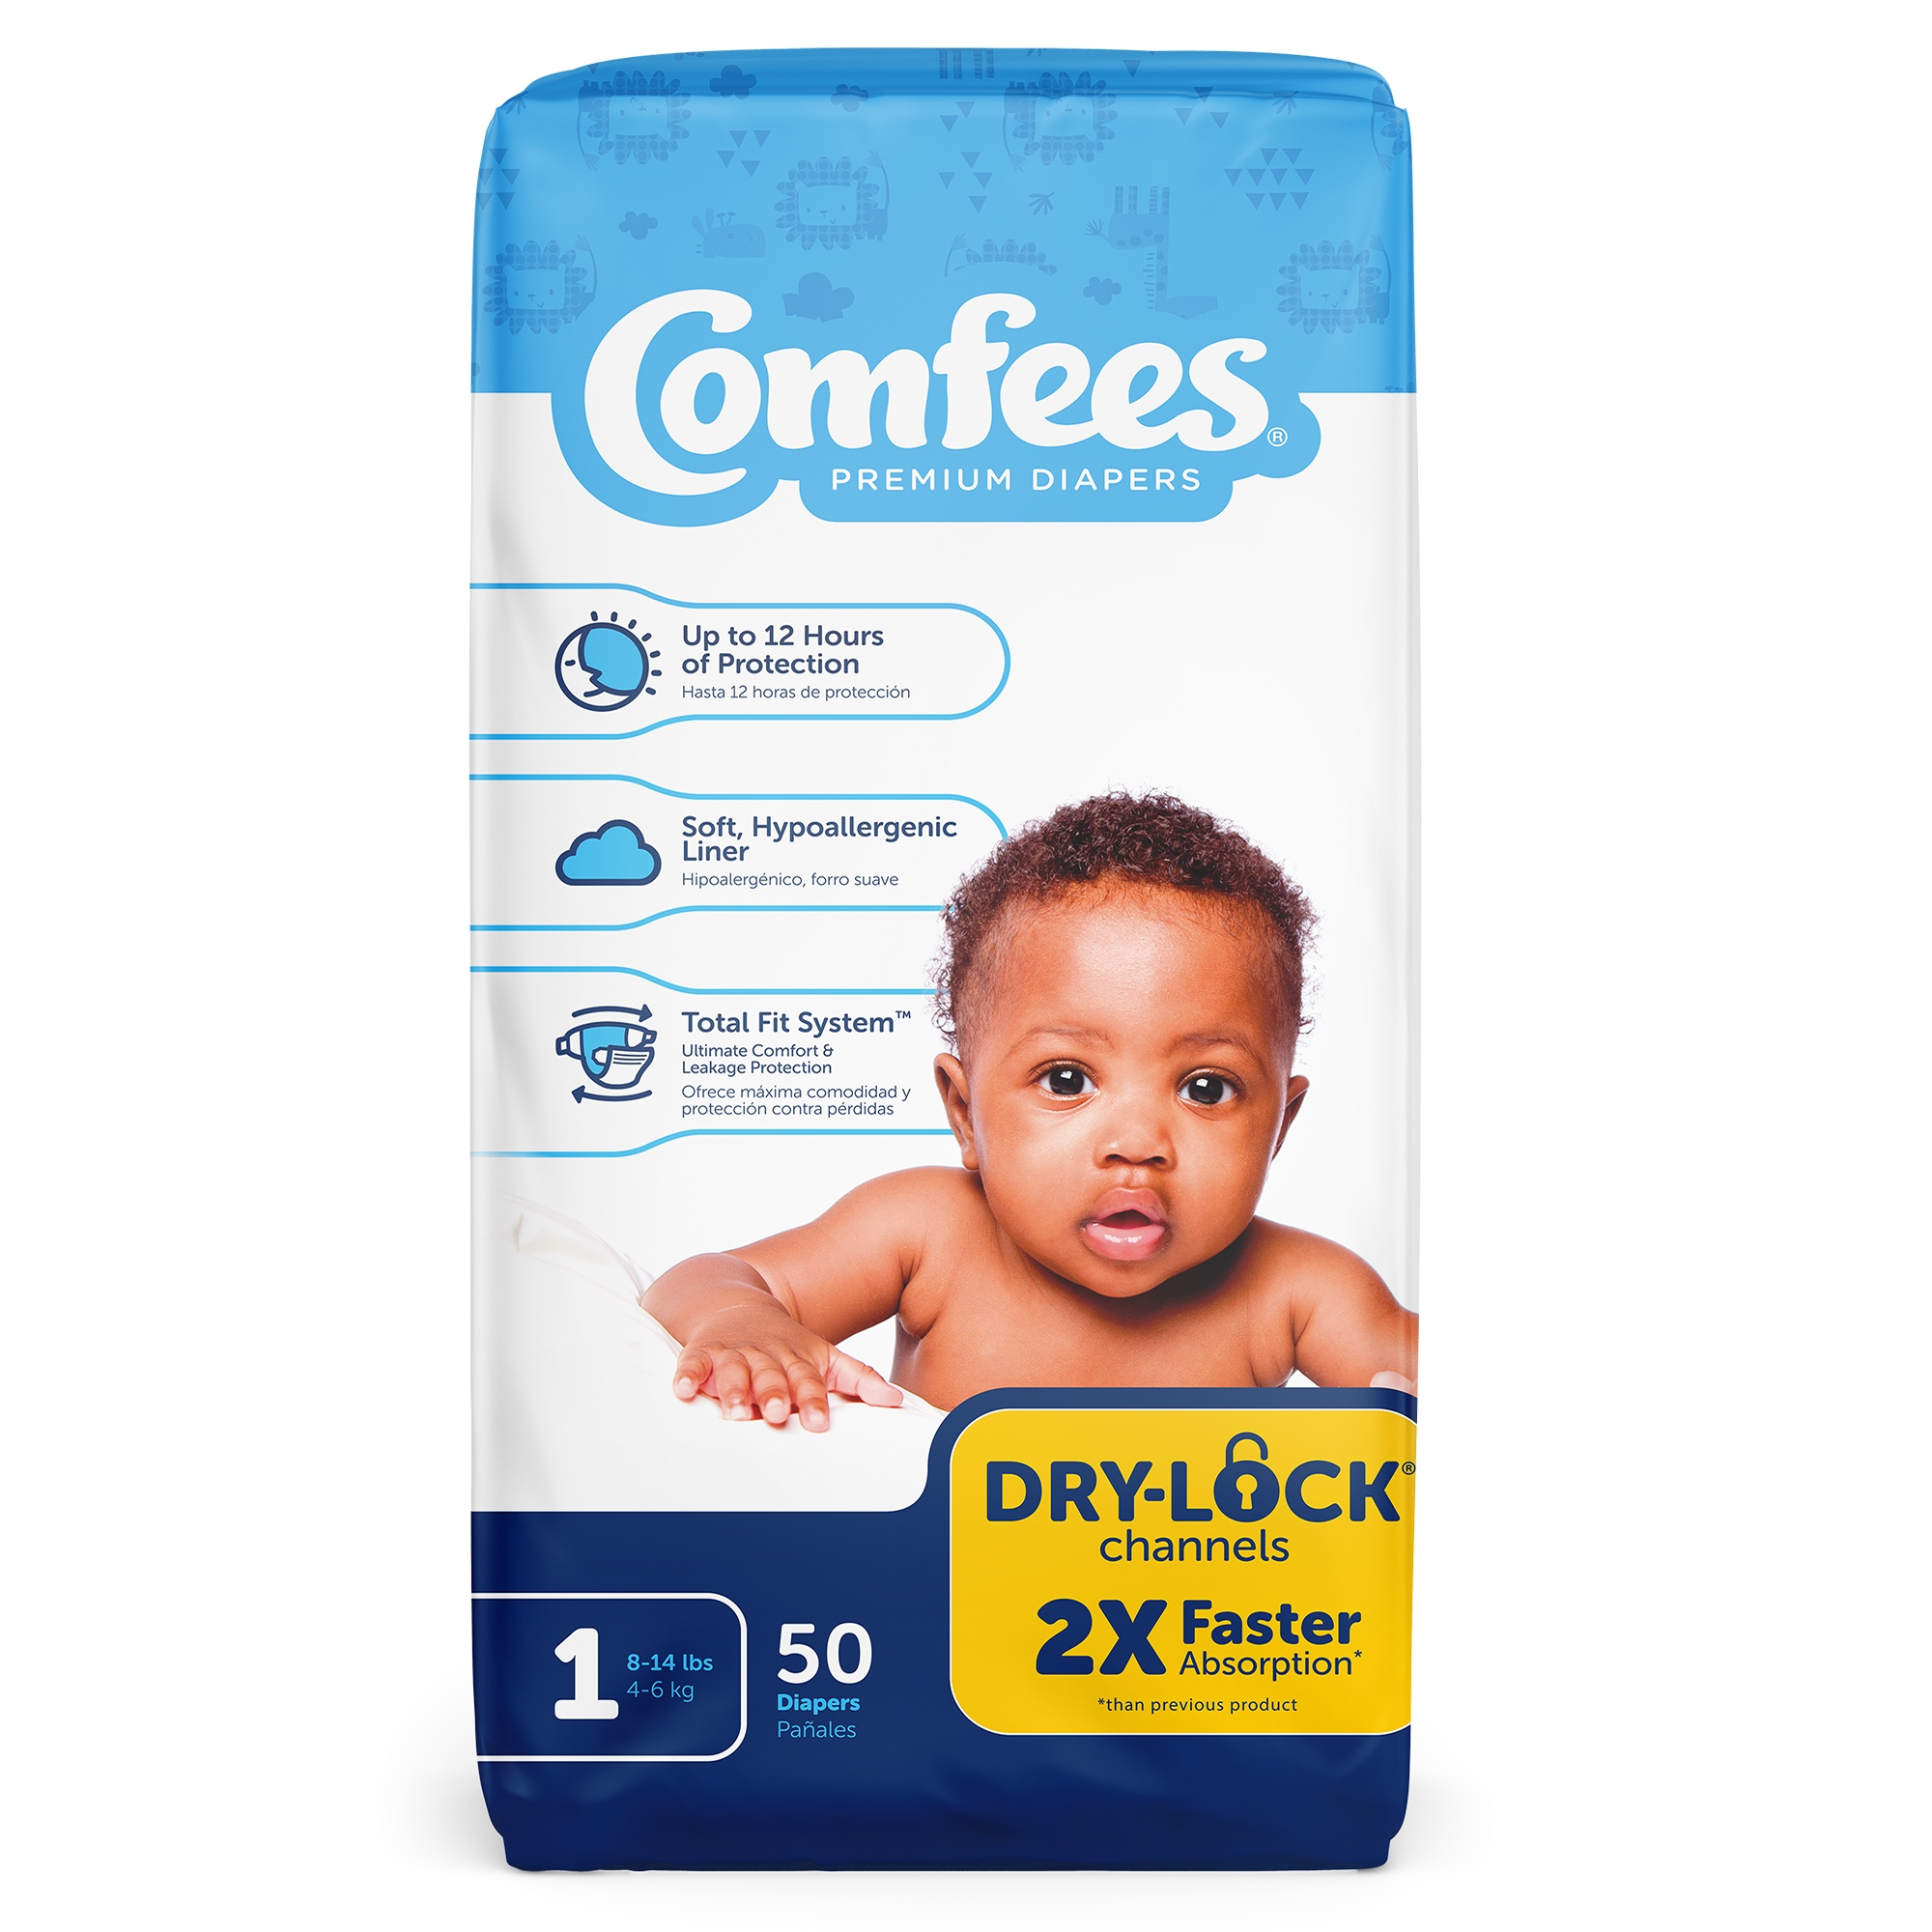 Comfees Baby Baby Diaper Size 1, 12 hour protection 8 to 14 lbs., 50 Count, 1 Pack - image 2 of 4